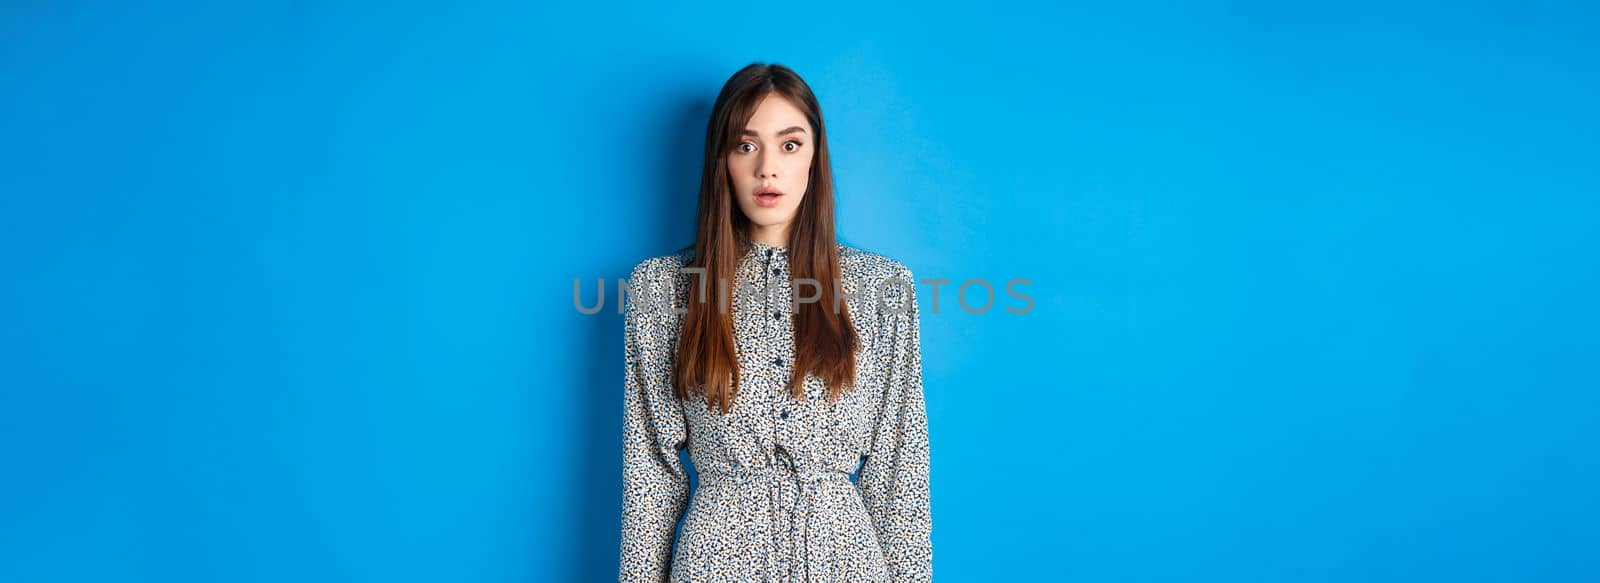 Shocked caucasian woman with long hair, wearing dress, gasping and standing in stupid against blue background, stare with disbelief.